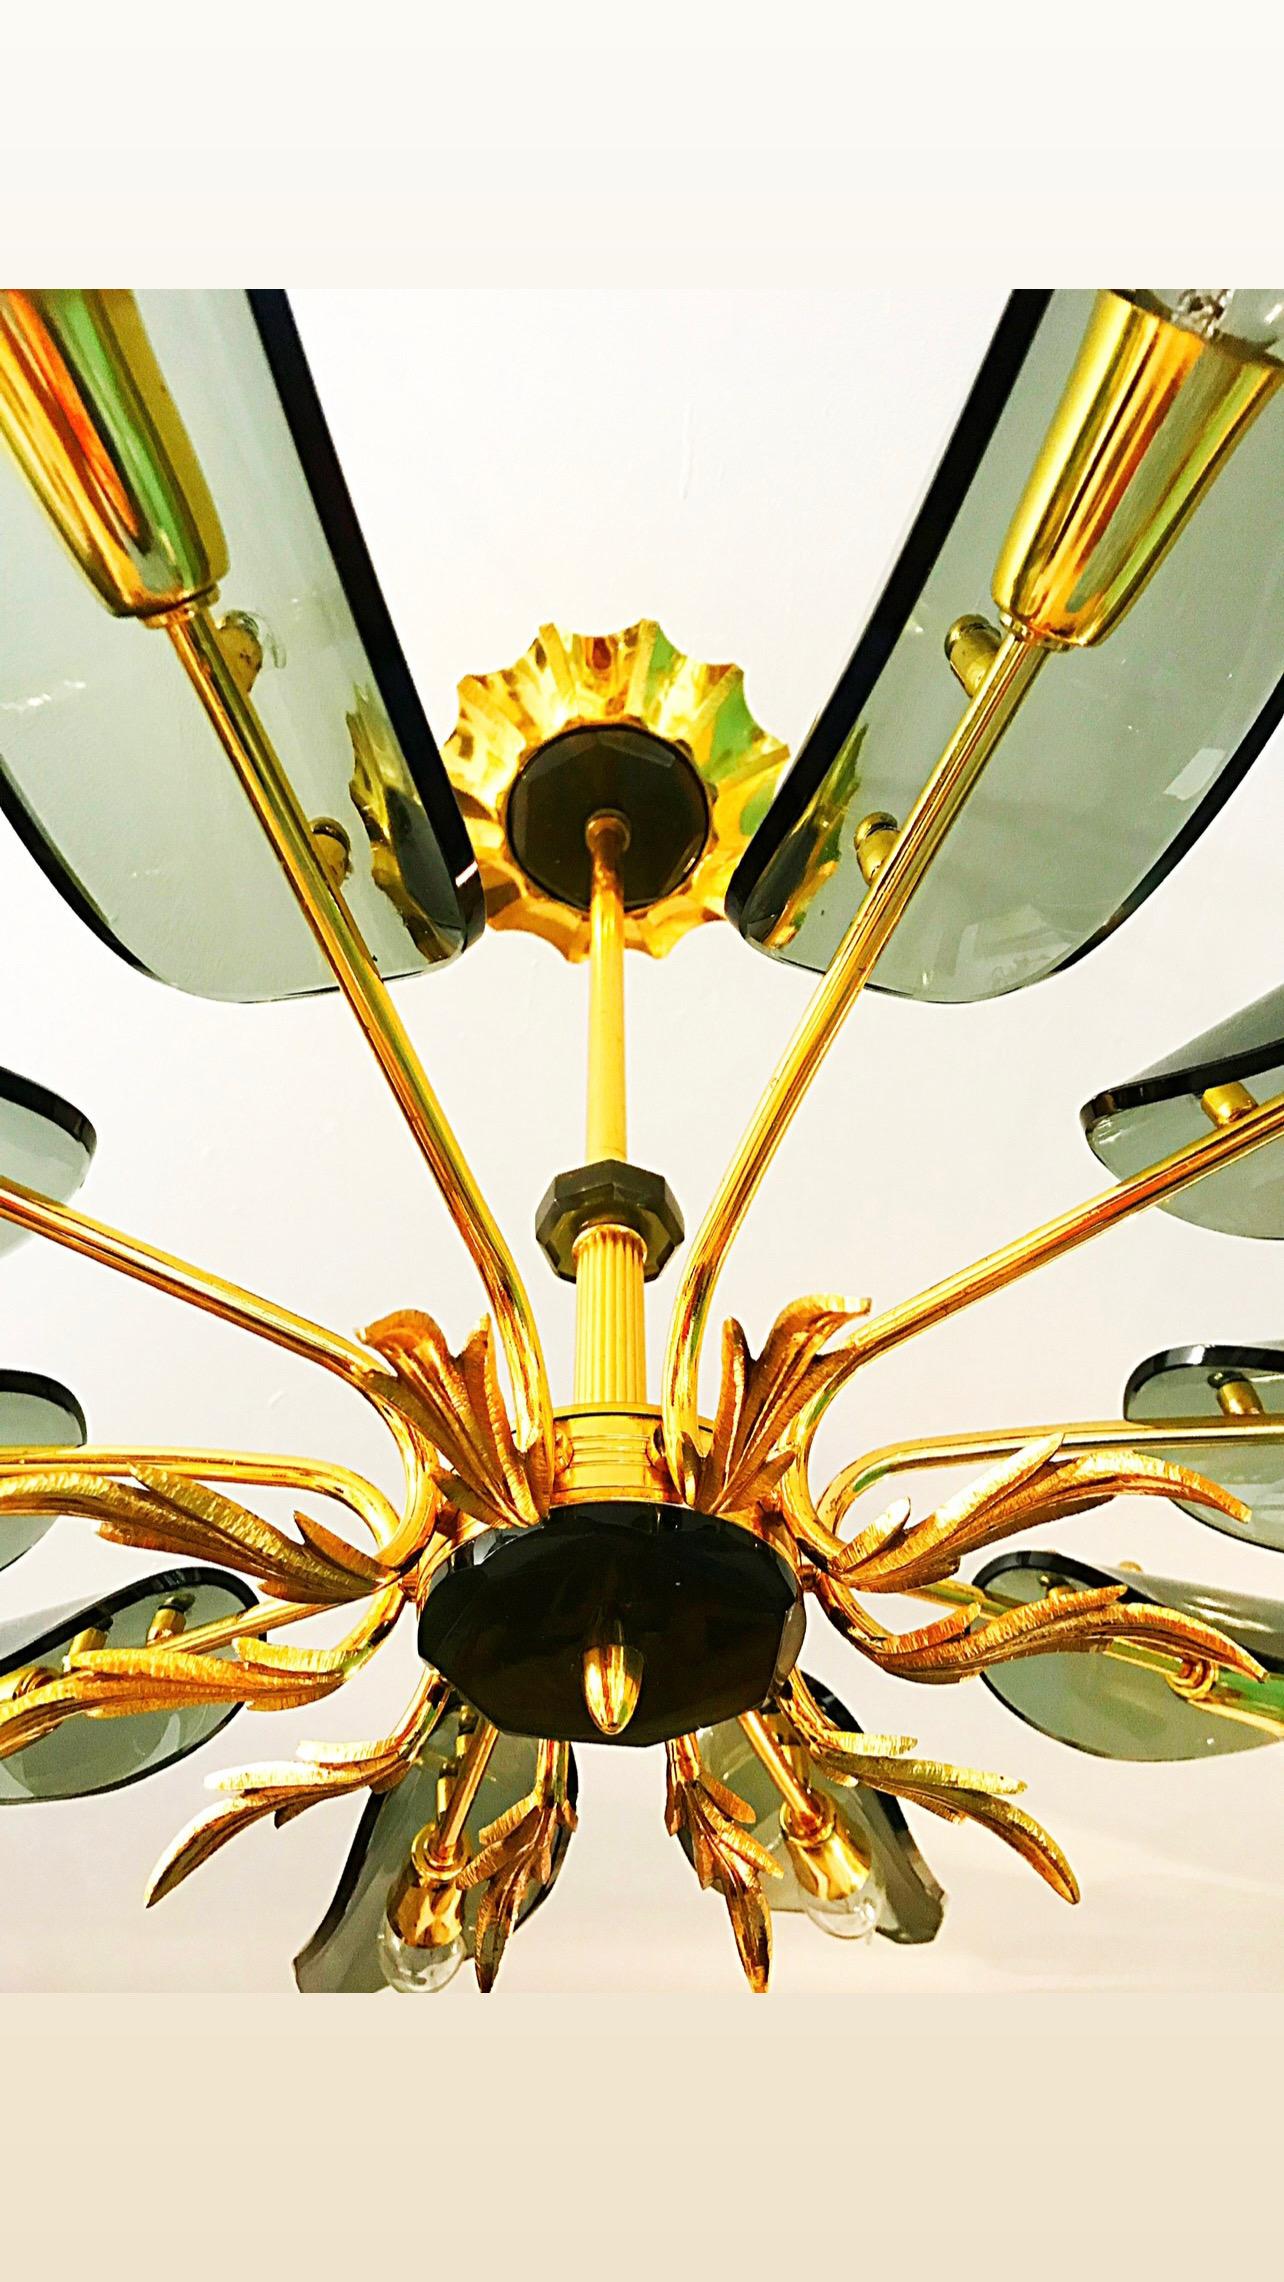 Superb chandelier with glass oversized 93 cm with gilt gold structure. The Design and the quality of the glass make this piece the best of the italian Design.

This Pieces of Arts glass show the exclusive design of Italian Designer in 1960/70. This